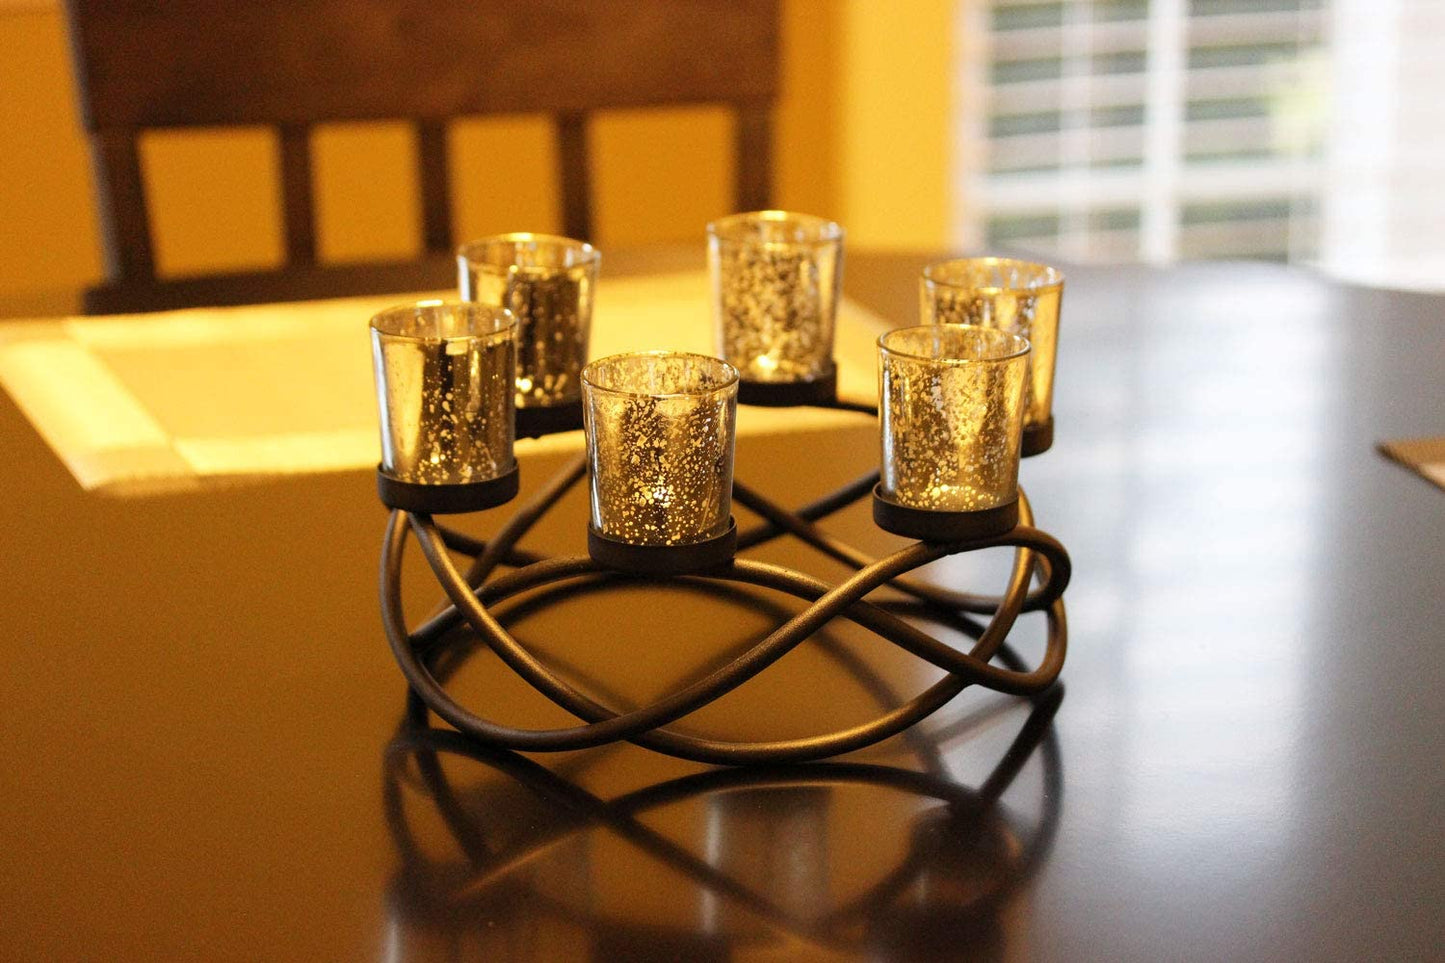 Iron Circular Table Centerpiece Decorations Candle Holder for Weddings, Patio, Kitchen, Dining Room, and Coffee Tables, Glass Votive Tealight Holders, Black, 6 Silver Cups